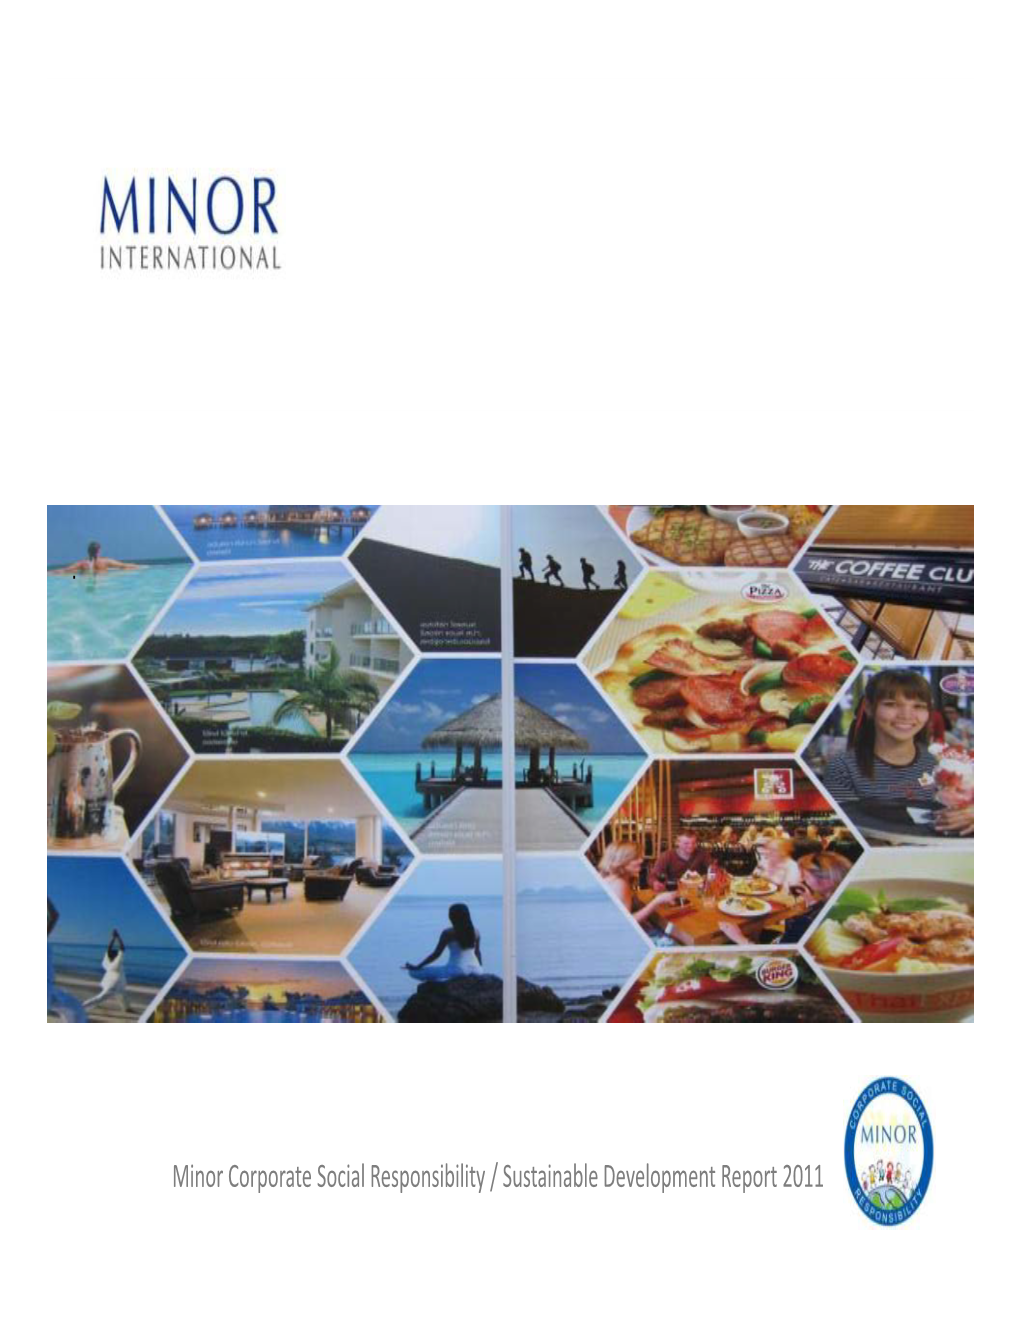 Minor Corporate Social Responsibility / Sustainable Development Report 2011 Our Journey to Sustainability